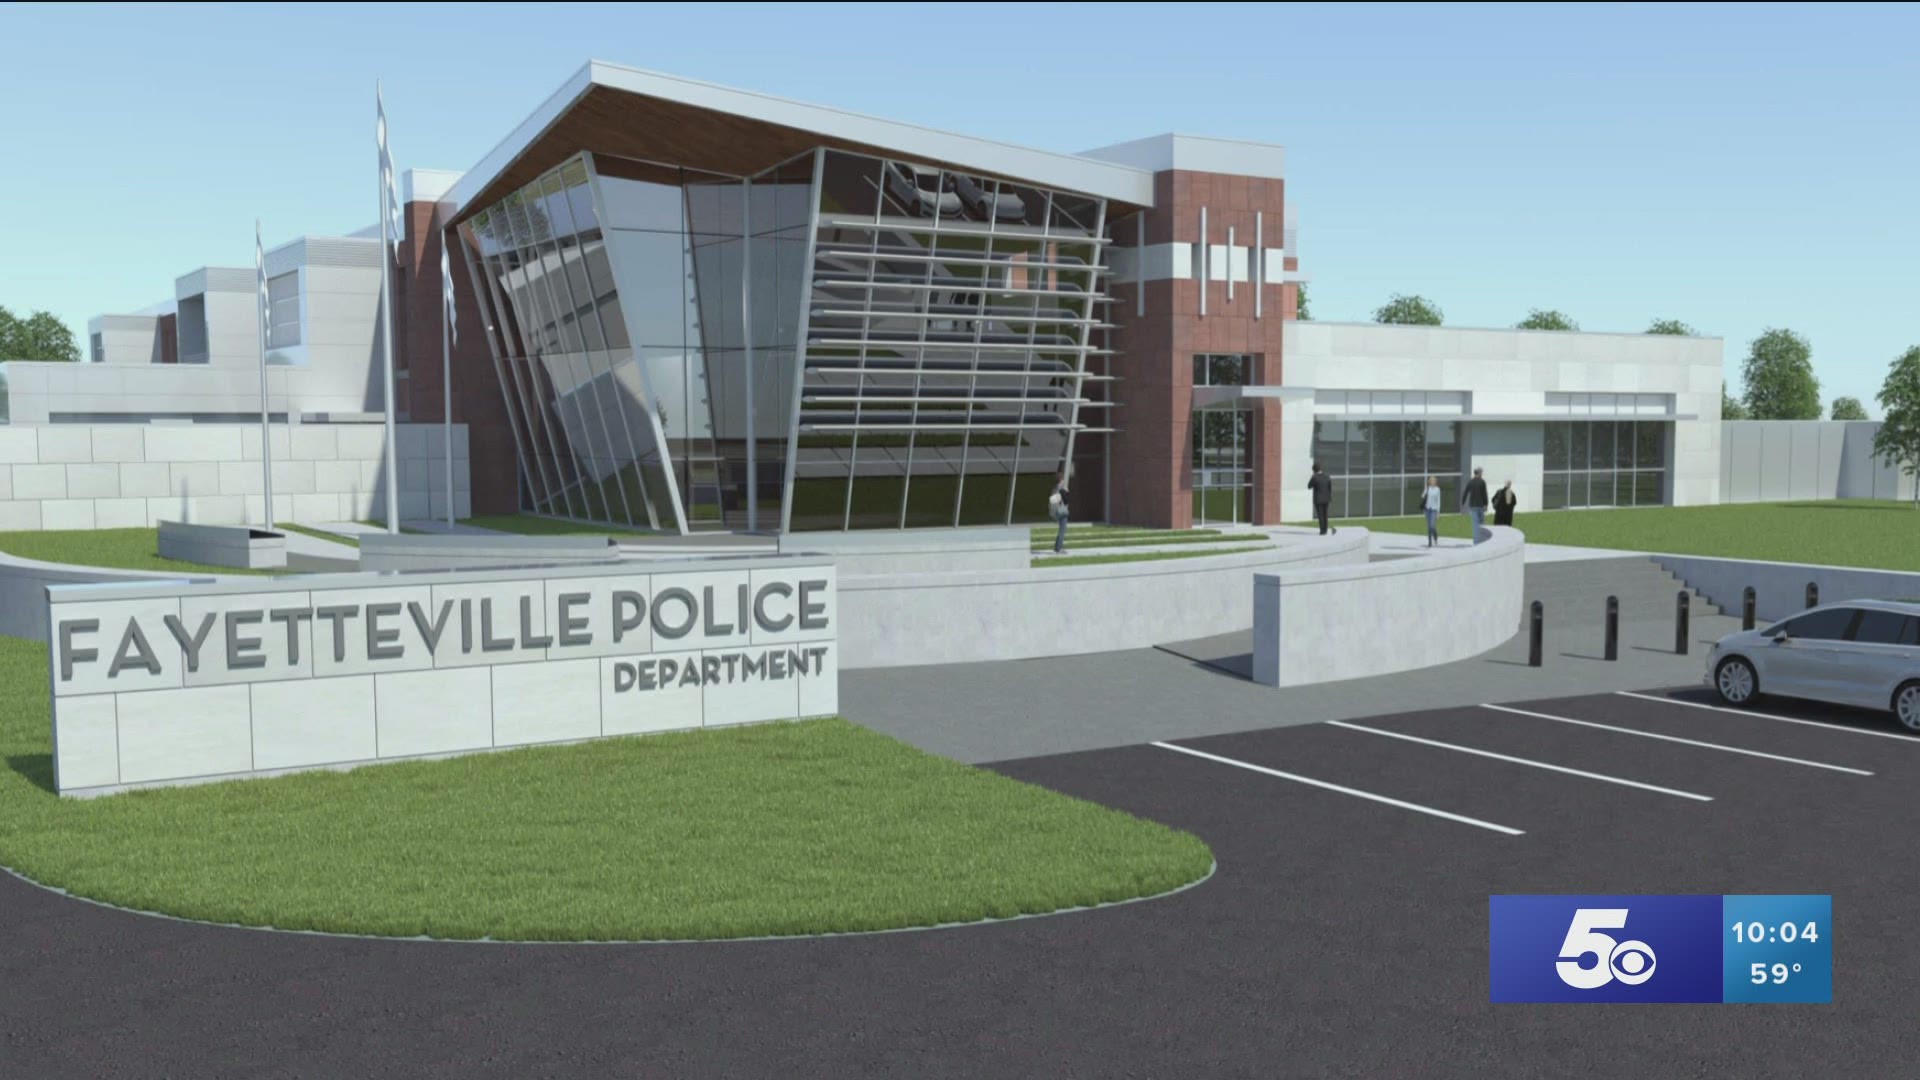 Fayetteville voters approved the building of the new headquarters by 71% in April of 2019, but construction for the facility has not yet started.